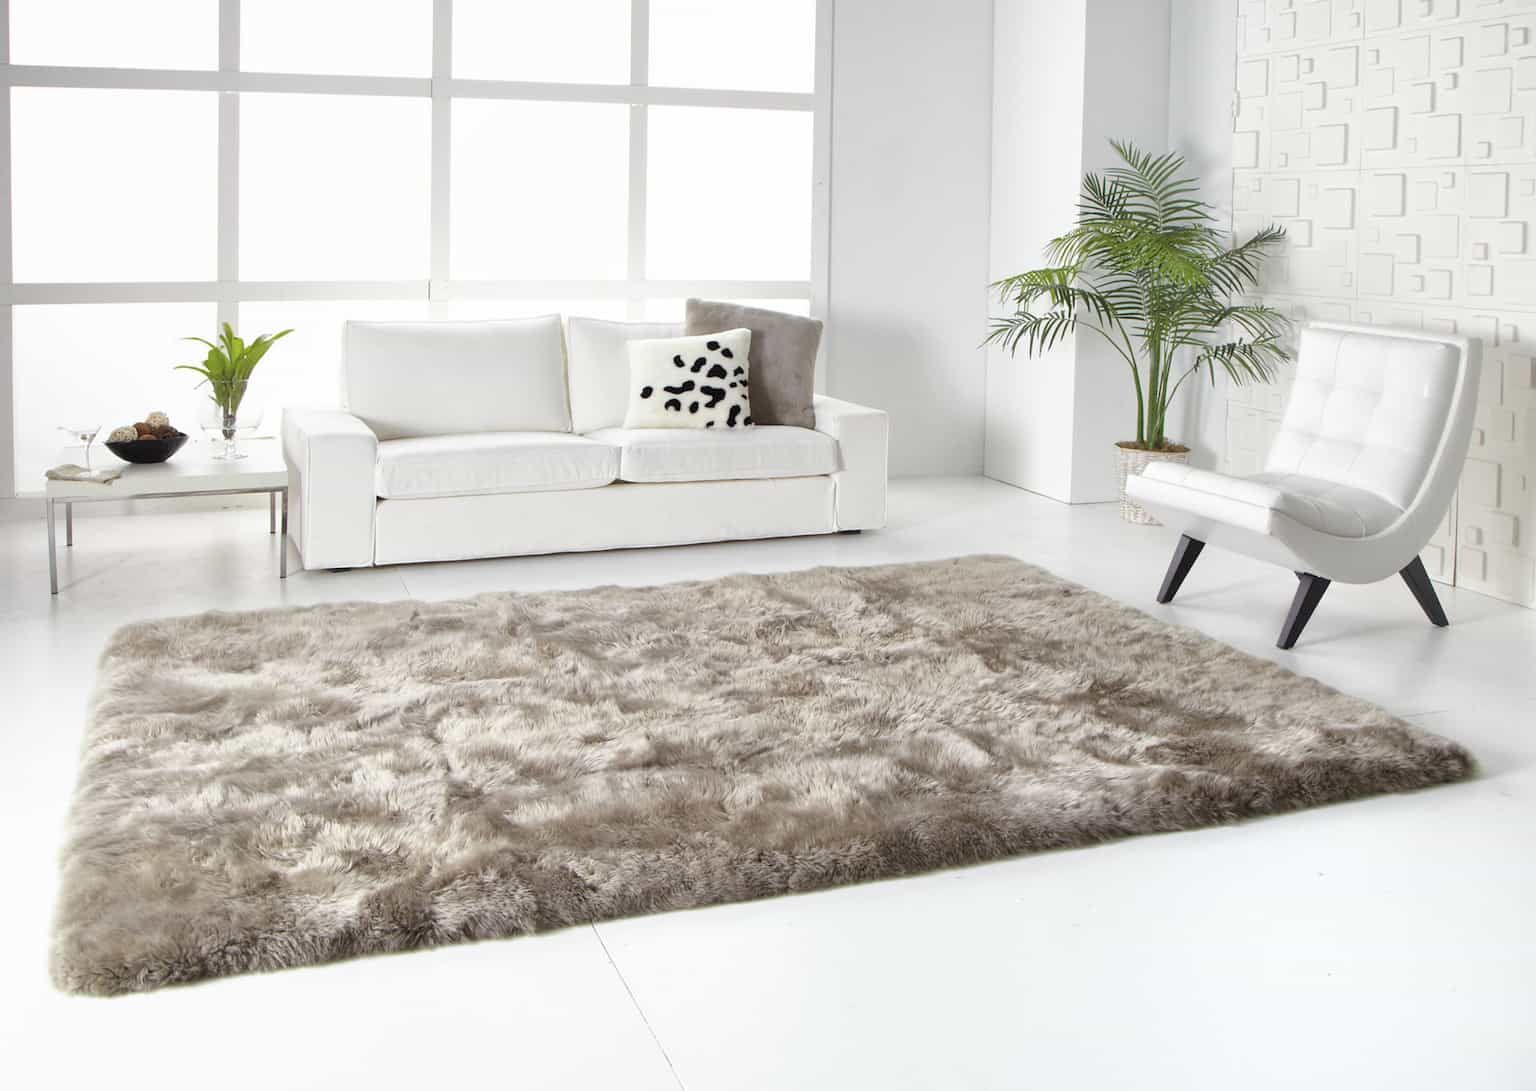 Elegance Living Room With Minimalist Chairs And Soft Sheepskin Fur Rug (Photo 1 of 15)